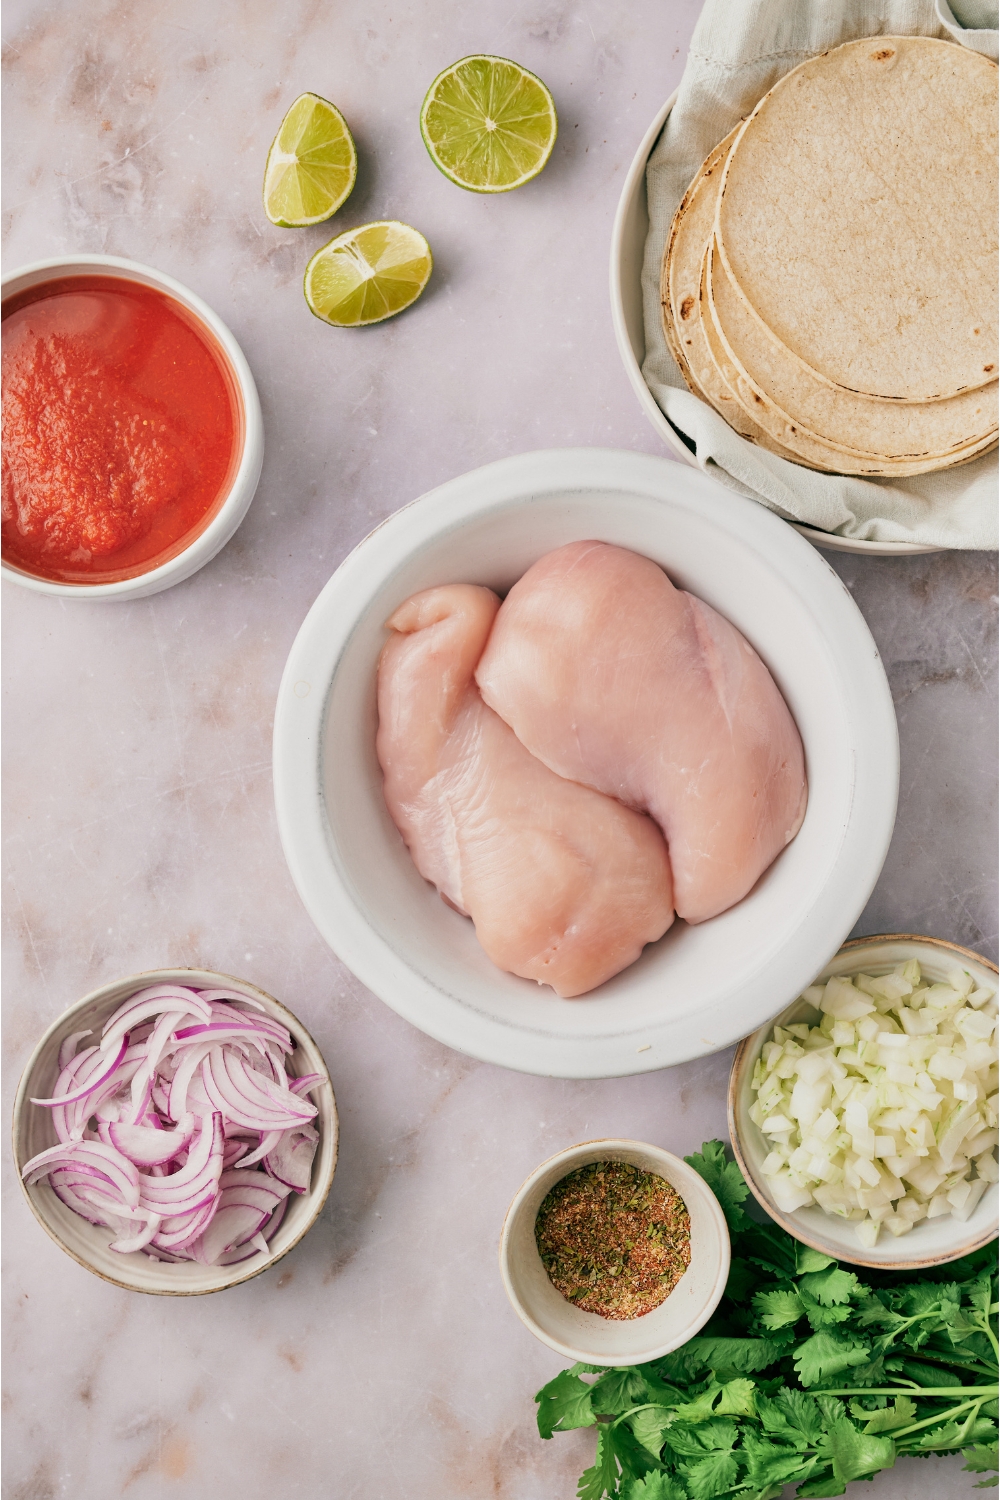 An assortment of ingredients including bowls of raw chicken breasts, sliced red onion, diced white onion, tomato sauce, spices, a plate of tortillas, and lime wedges.